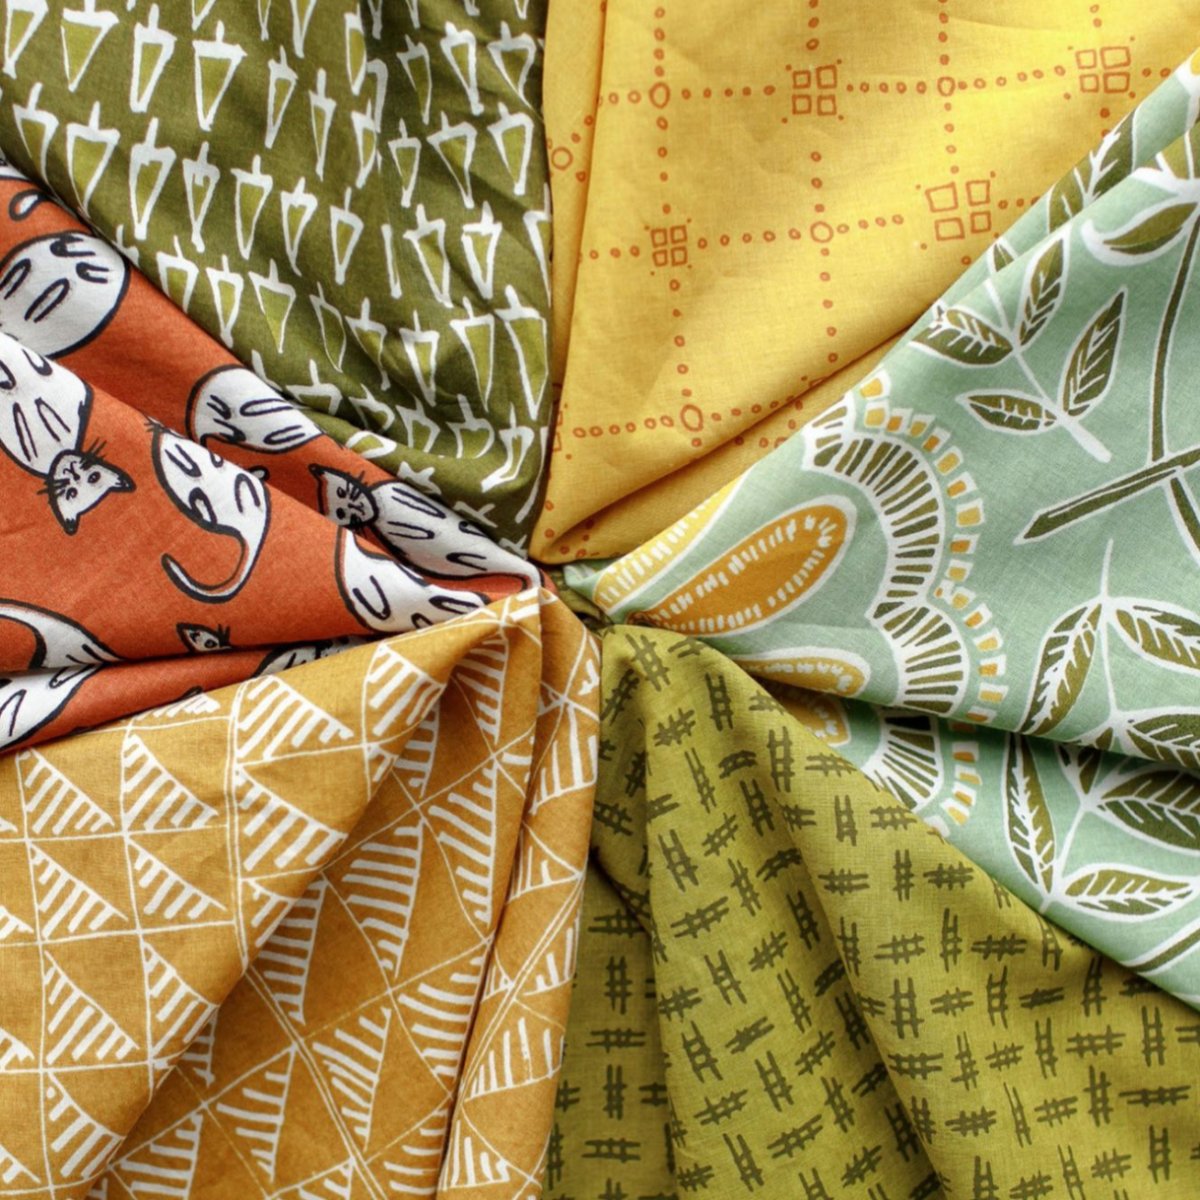 Image of an assortment of bandanas in various colors. Designed by Hemlock Goods in Fulton, MO and screen printed by hand in India.